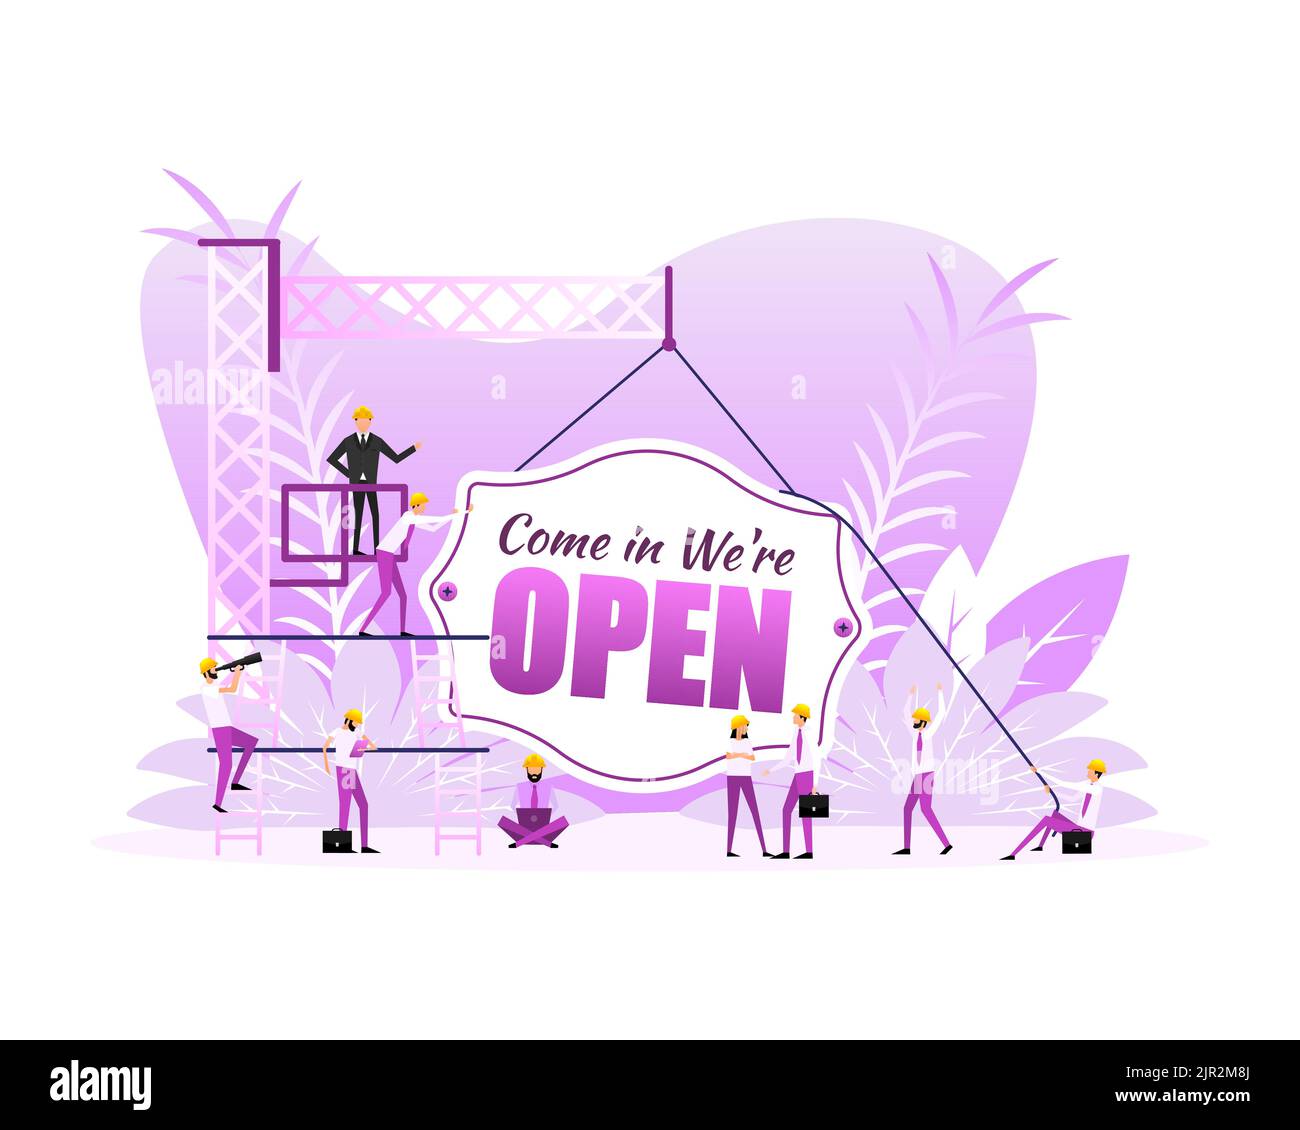 Come in we are open sign door, many people. Vector illustration Stock Vector